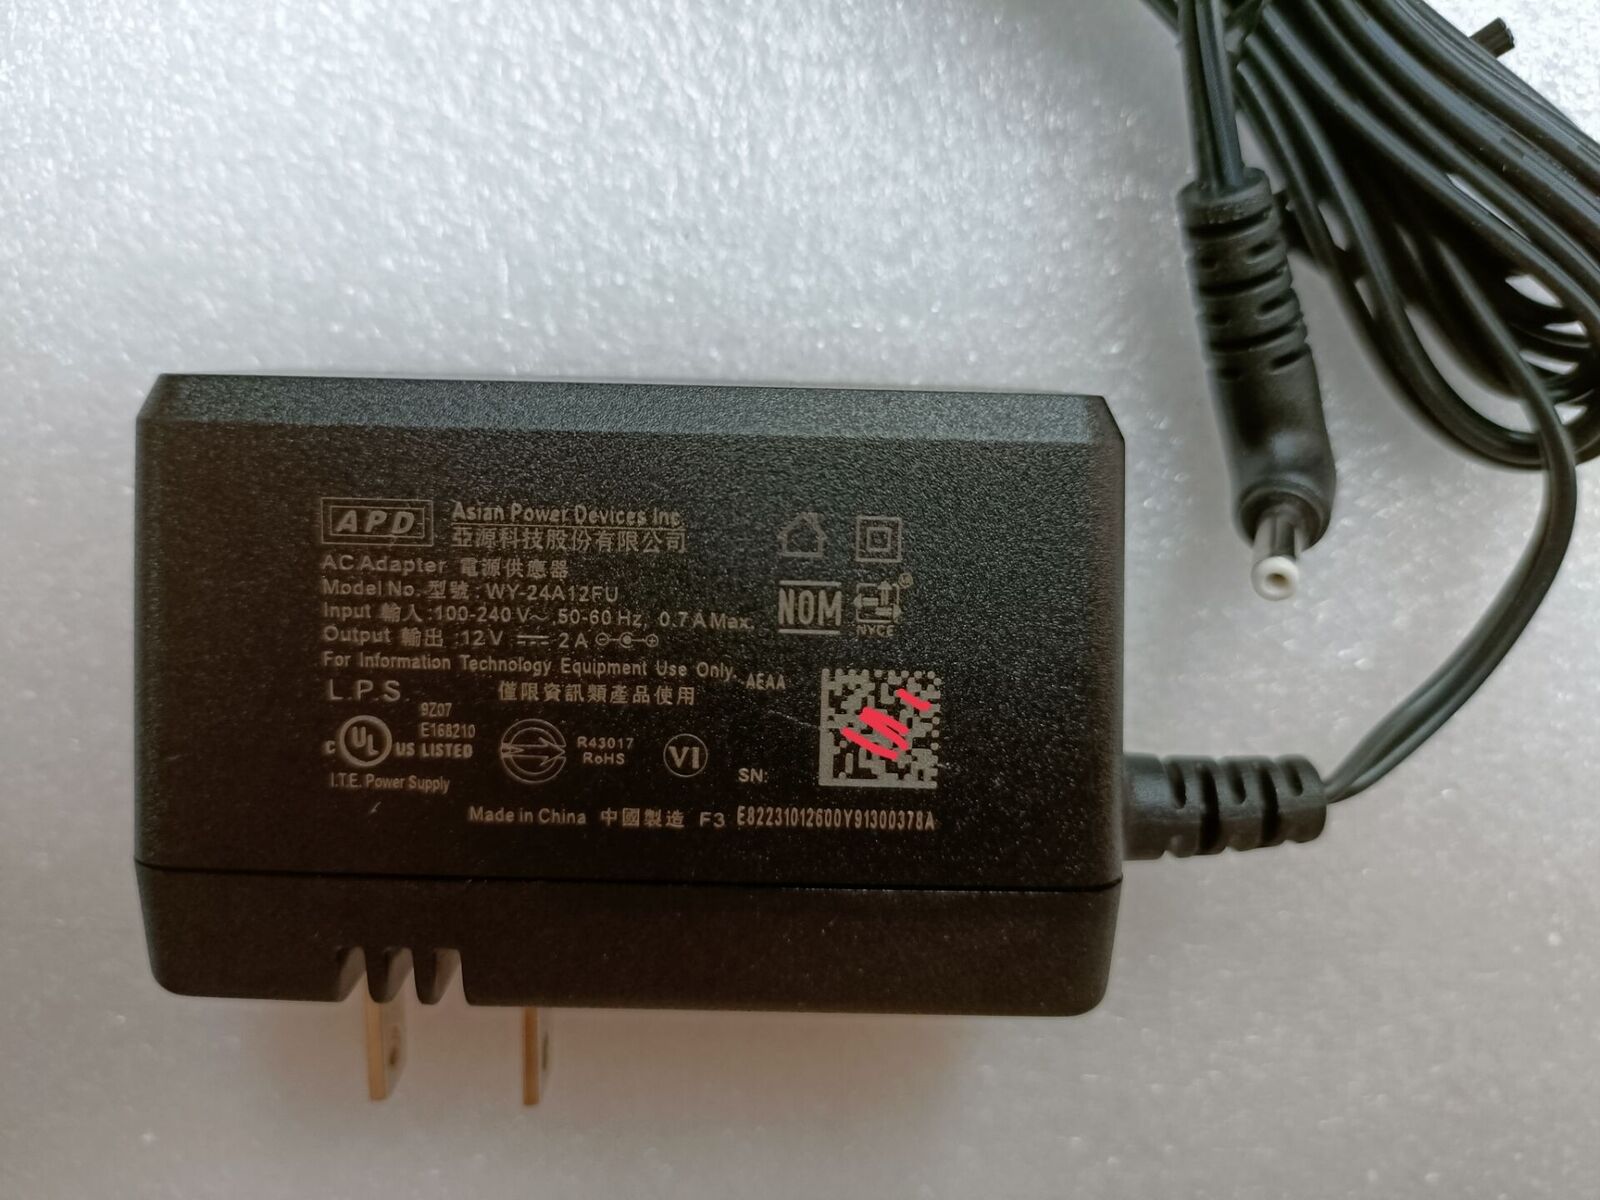 *Brand NEW*Genuine APD AC Adapter WY-24A12FU 12V 2A 3.5*1.0MM Power Supply - Click Image to Close